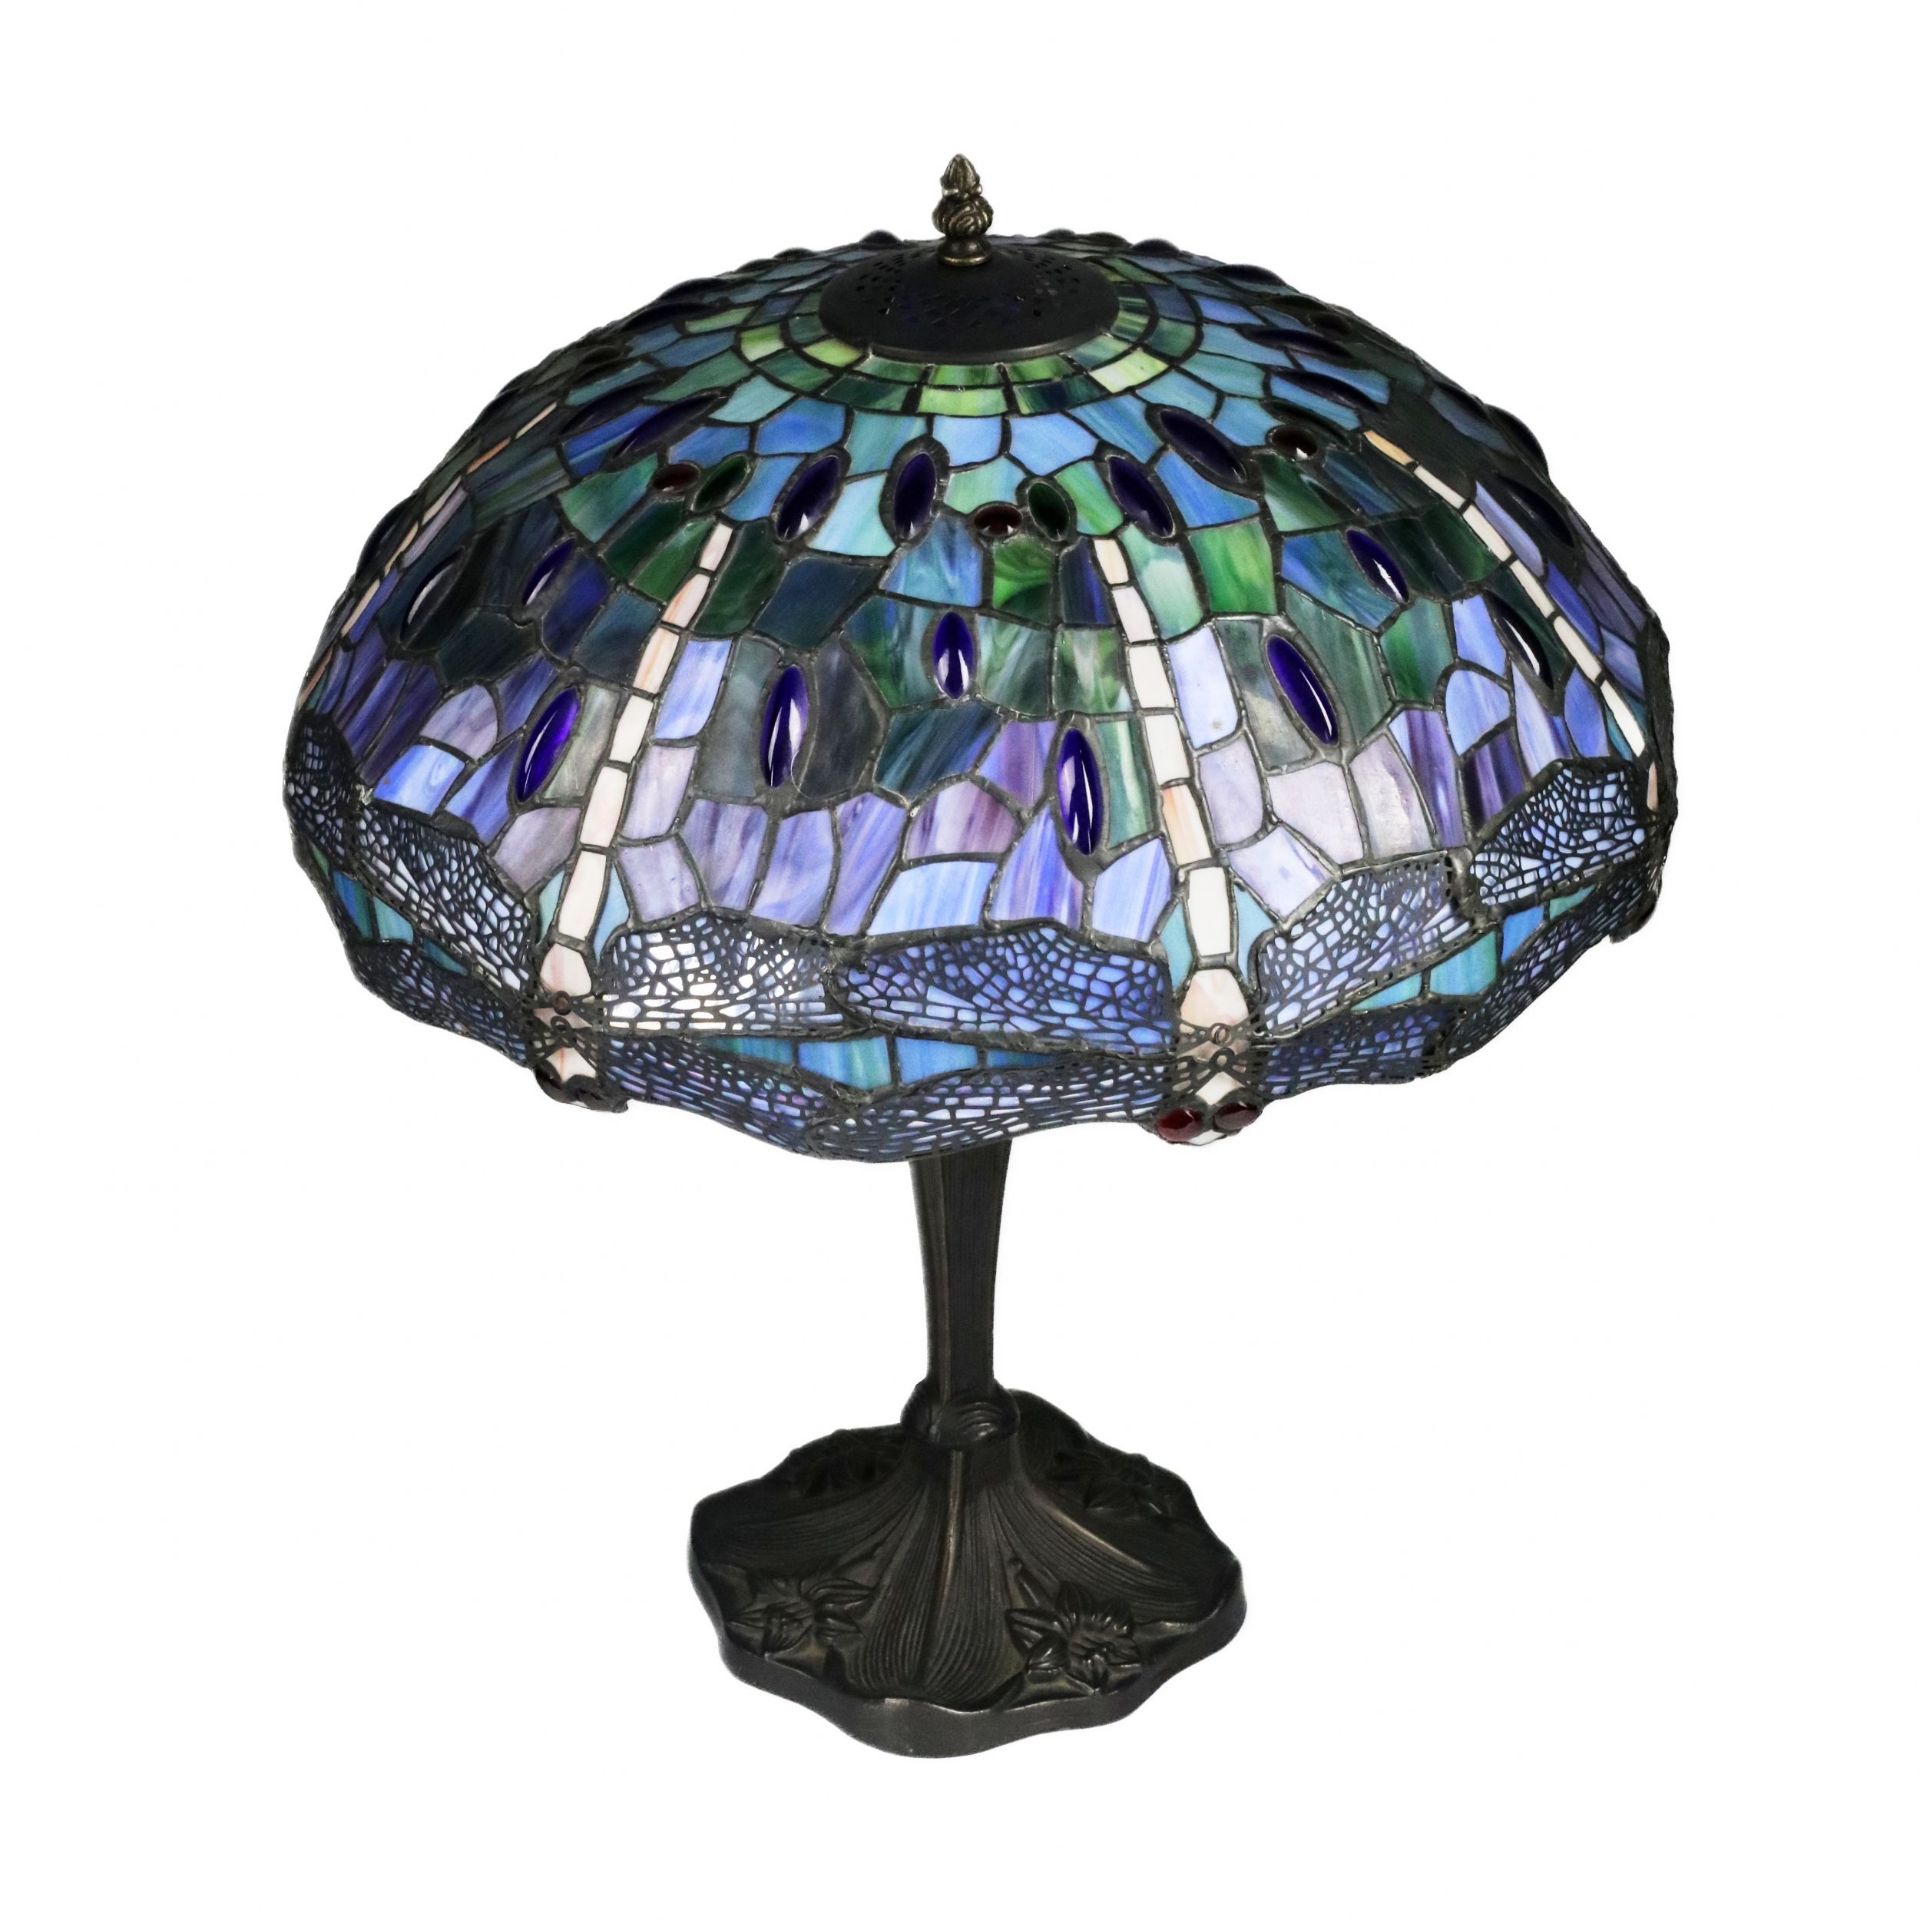 Stained glass lamp in Tiffany style. 20th century. - Image 3 of 5